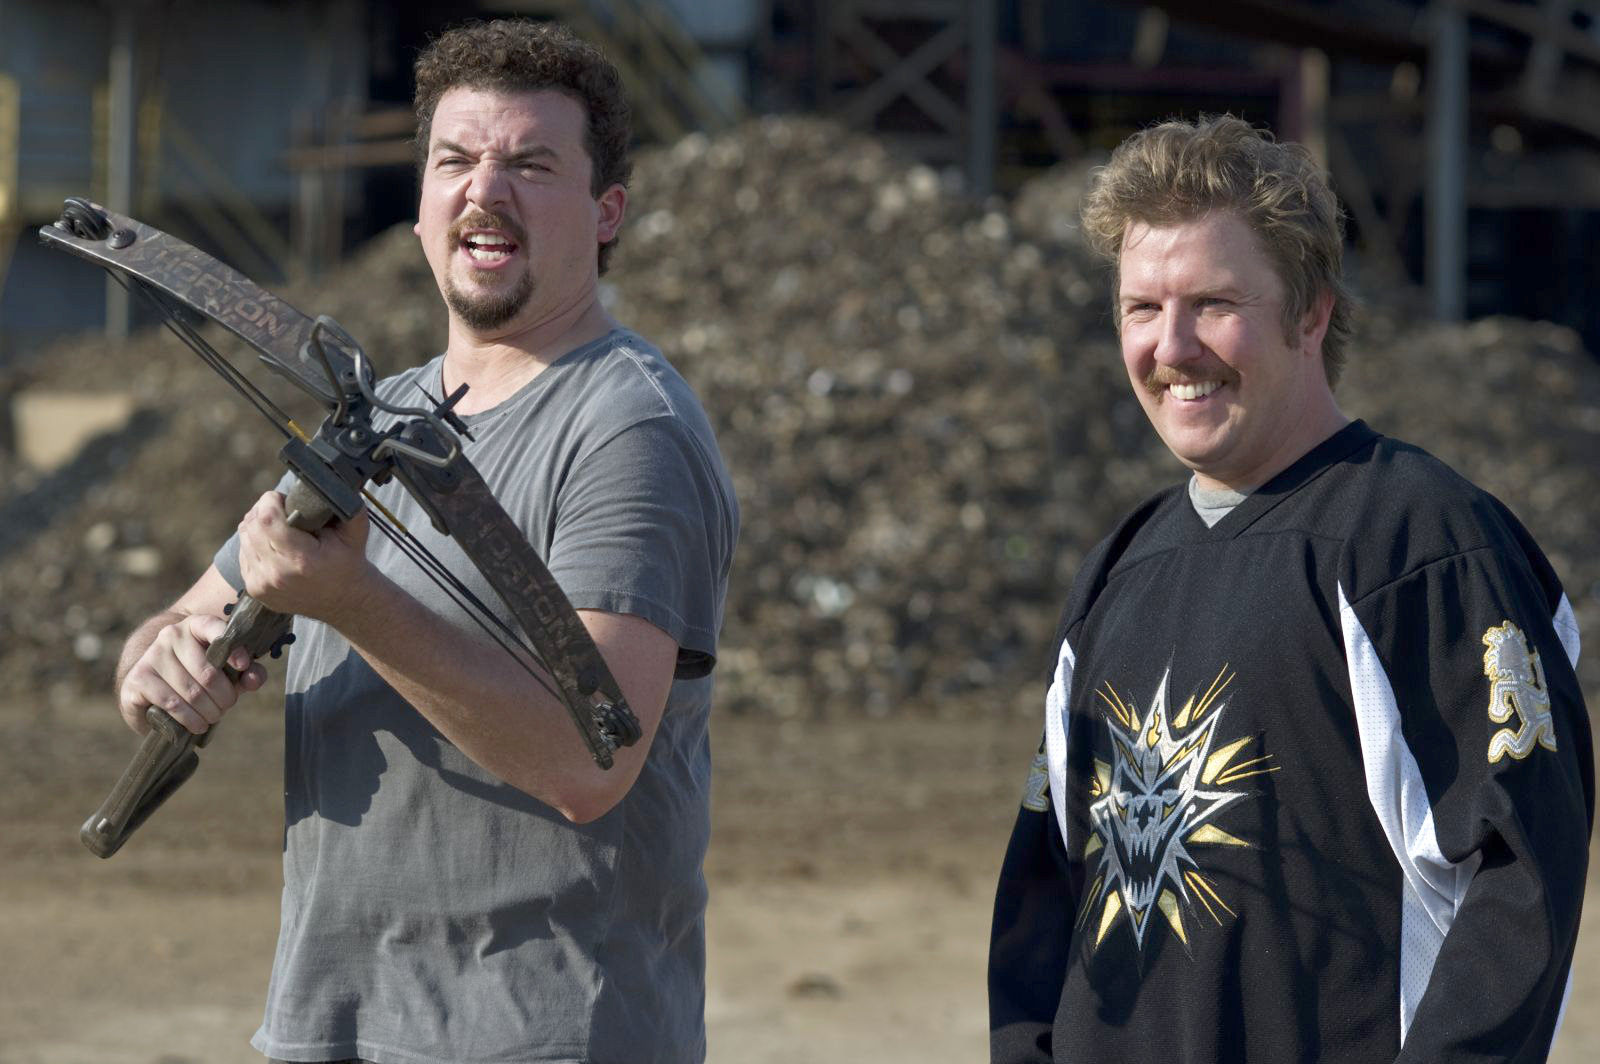 Danny McBride stars as Dwayne and Nick Swardson stars as Travis in Columbia Pictures' 30 Minutes or Less (2011)